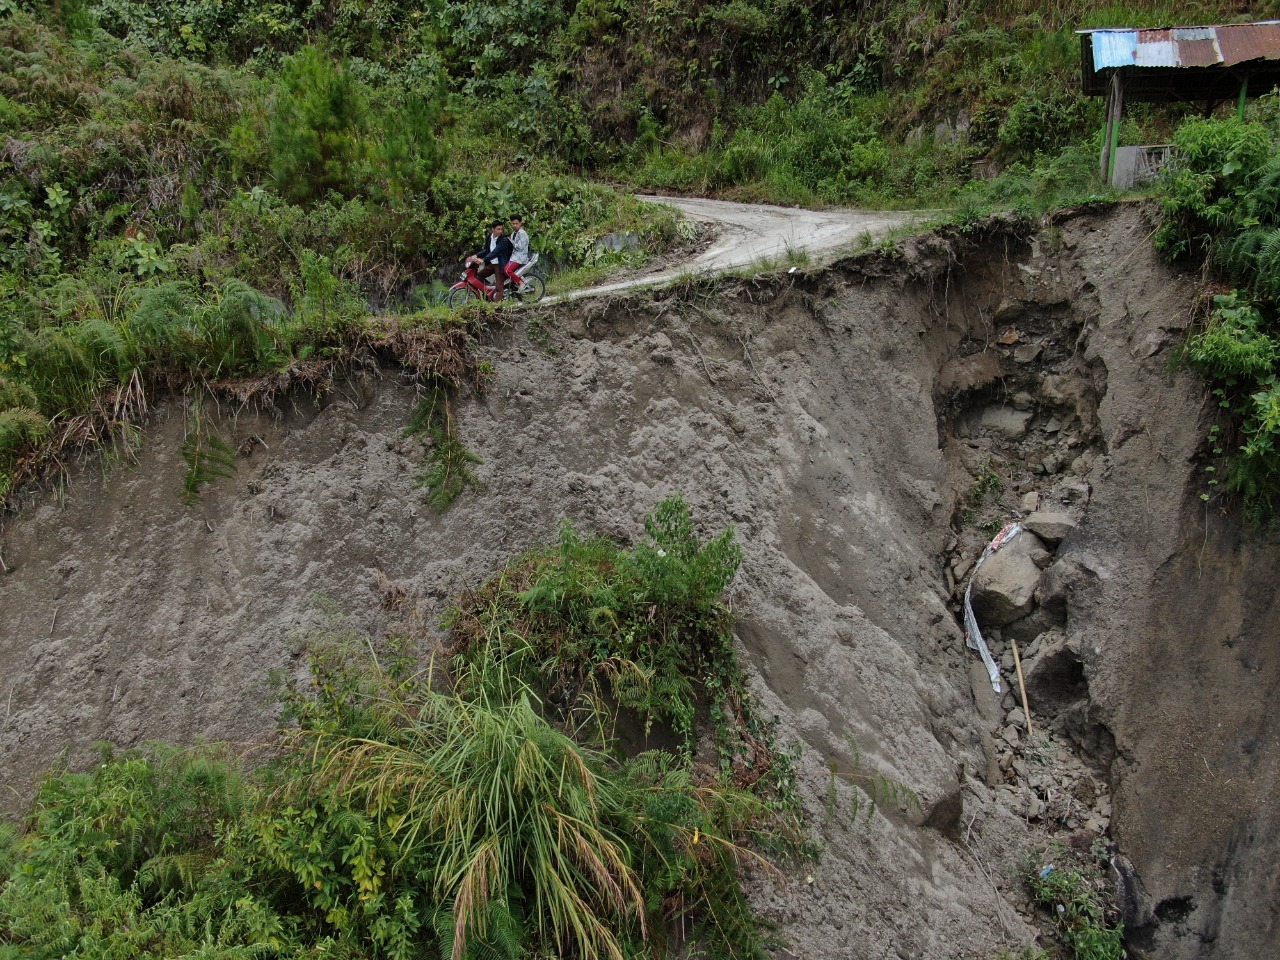 Sigapiton Village’s Paddy Fields and Main Road Hit by Landslide from The Caldera Toba Nomadic Escape